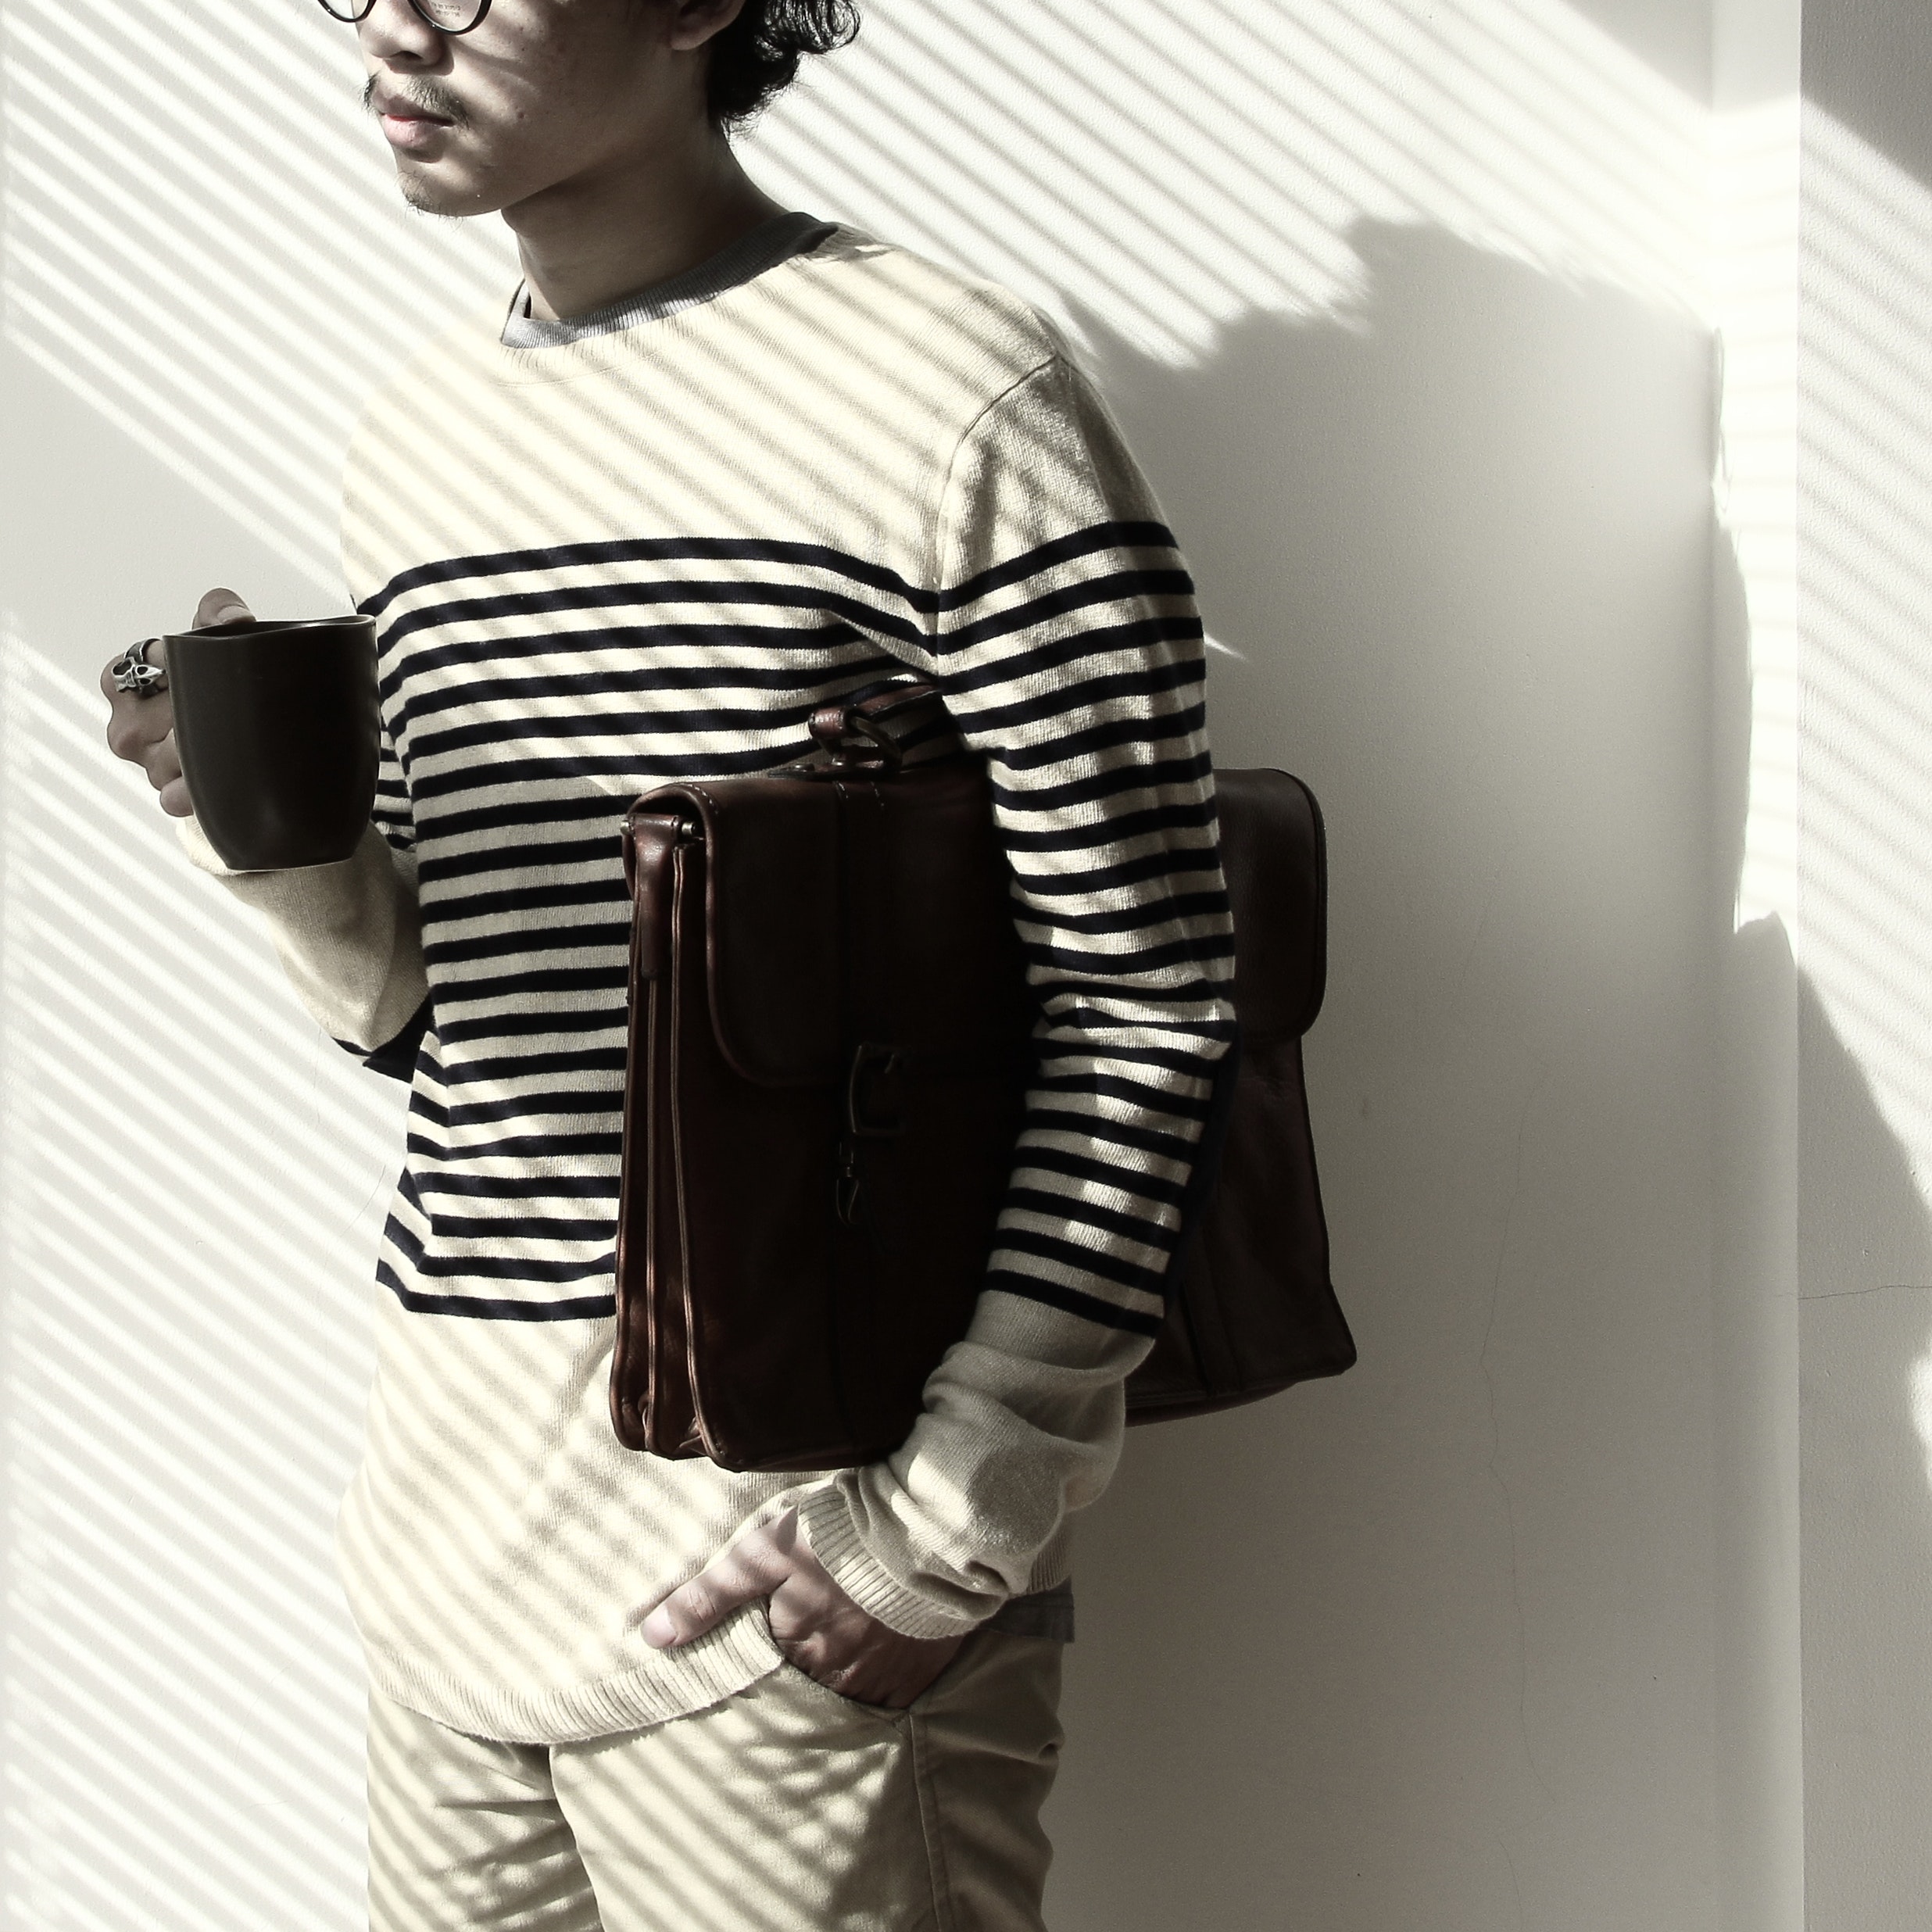 Standing brunet person waring eyeglasses and white black stripe sweater holding mug and briefcase photo